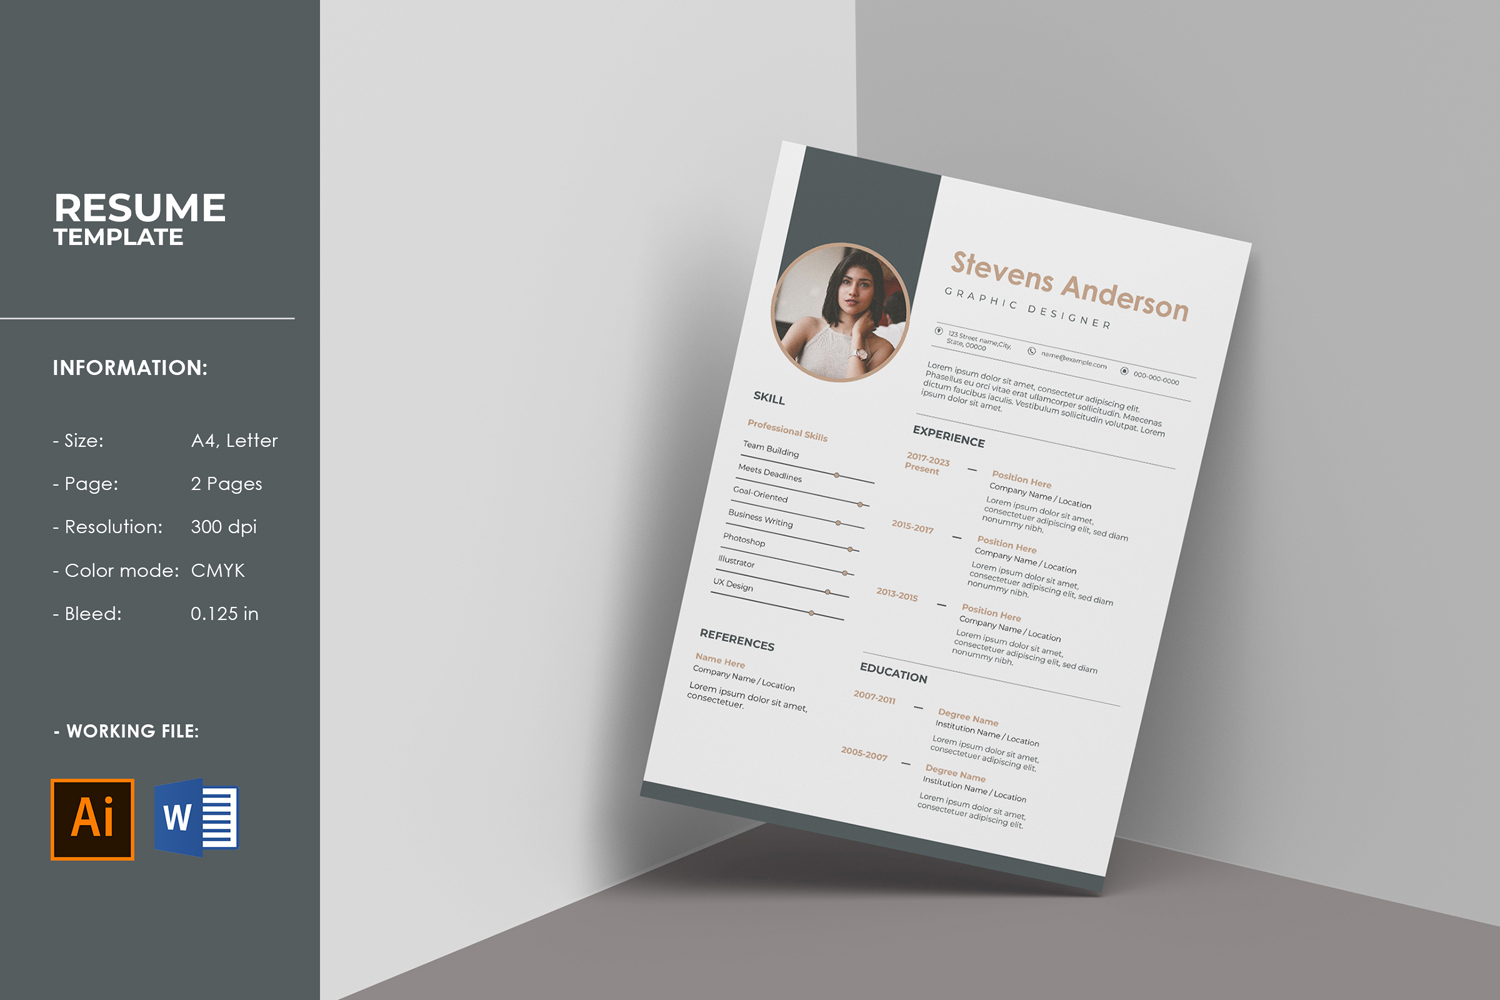 Professional Resume / Cv Template. Illustrator and Ms word template